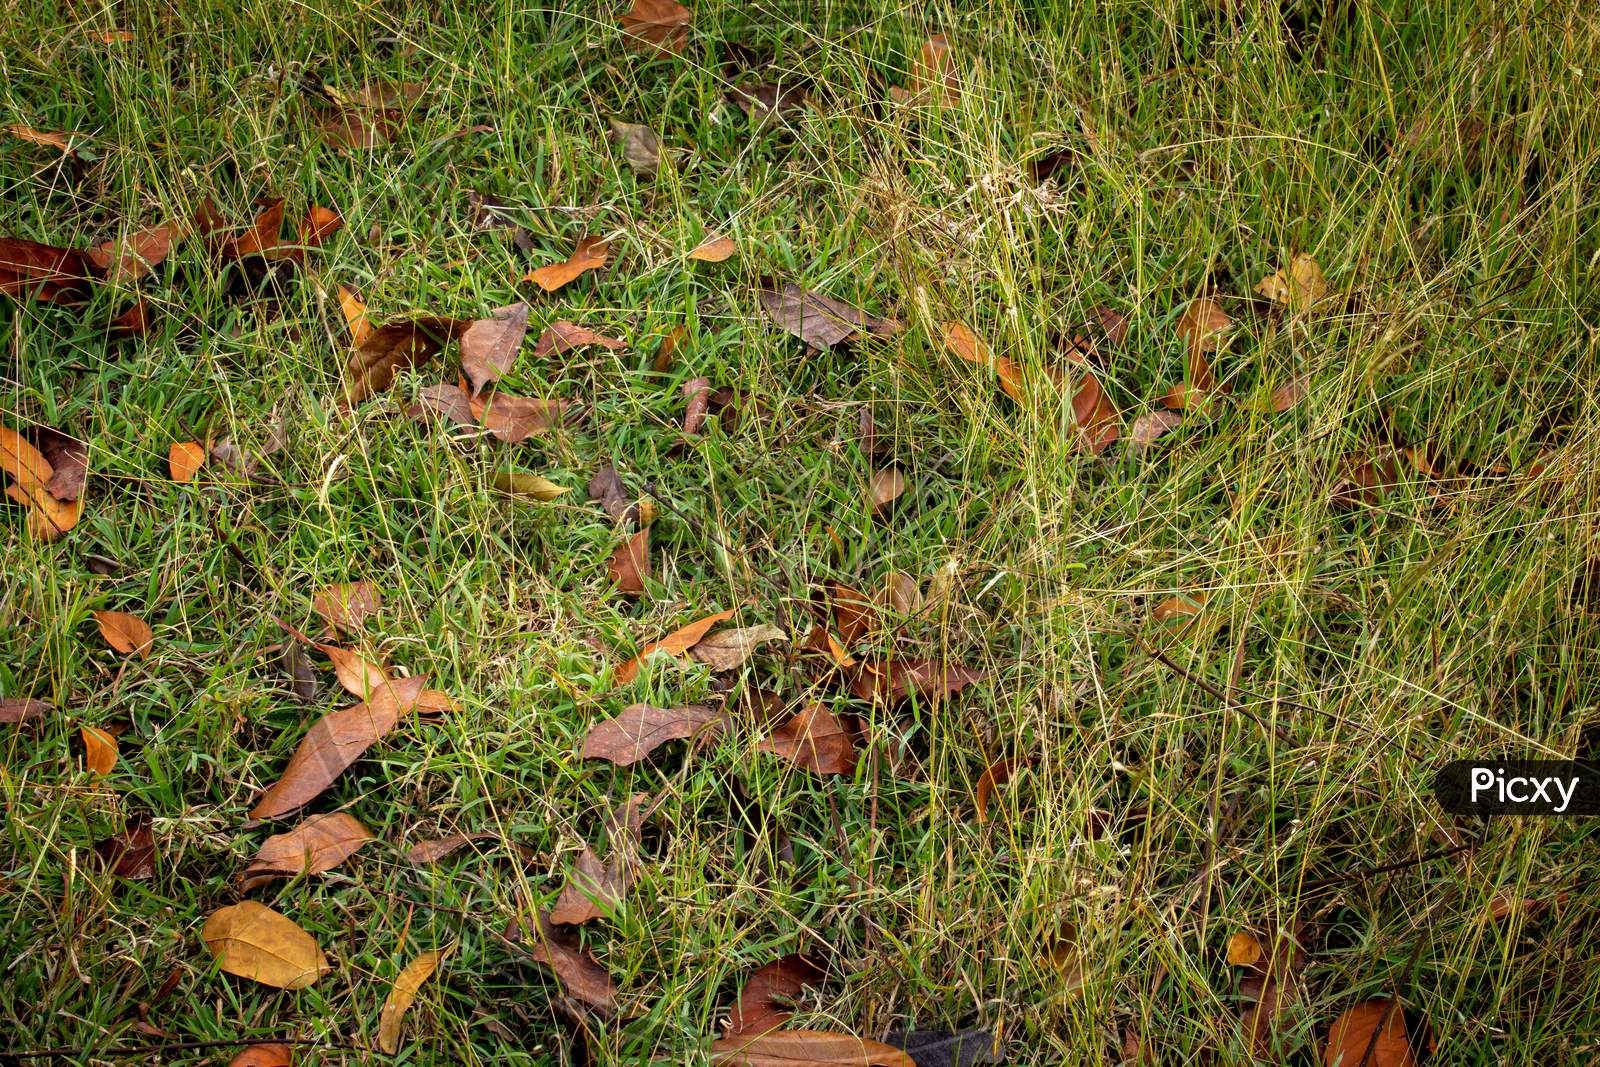 Dried Fallen Leaves Over The Uneven Grass In Forest Area